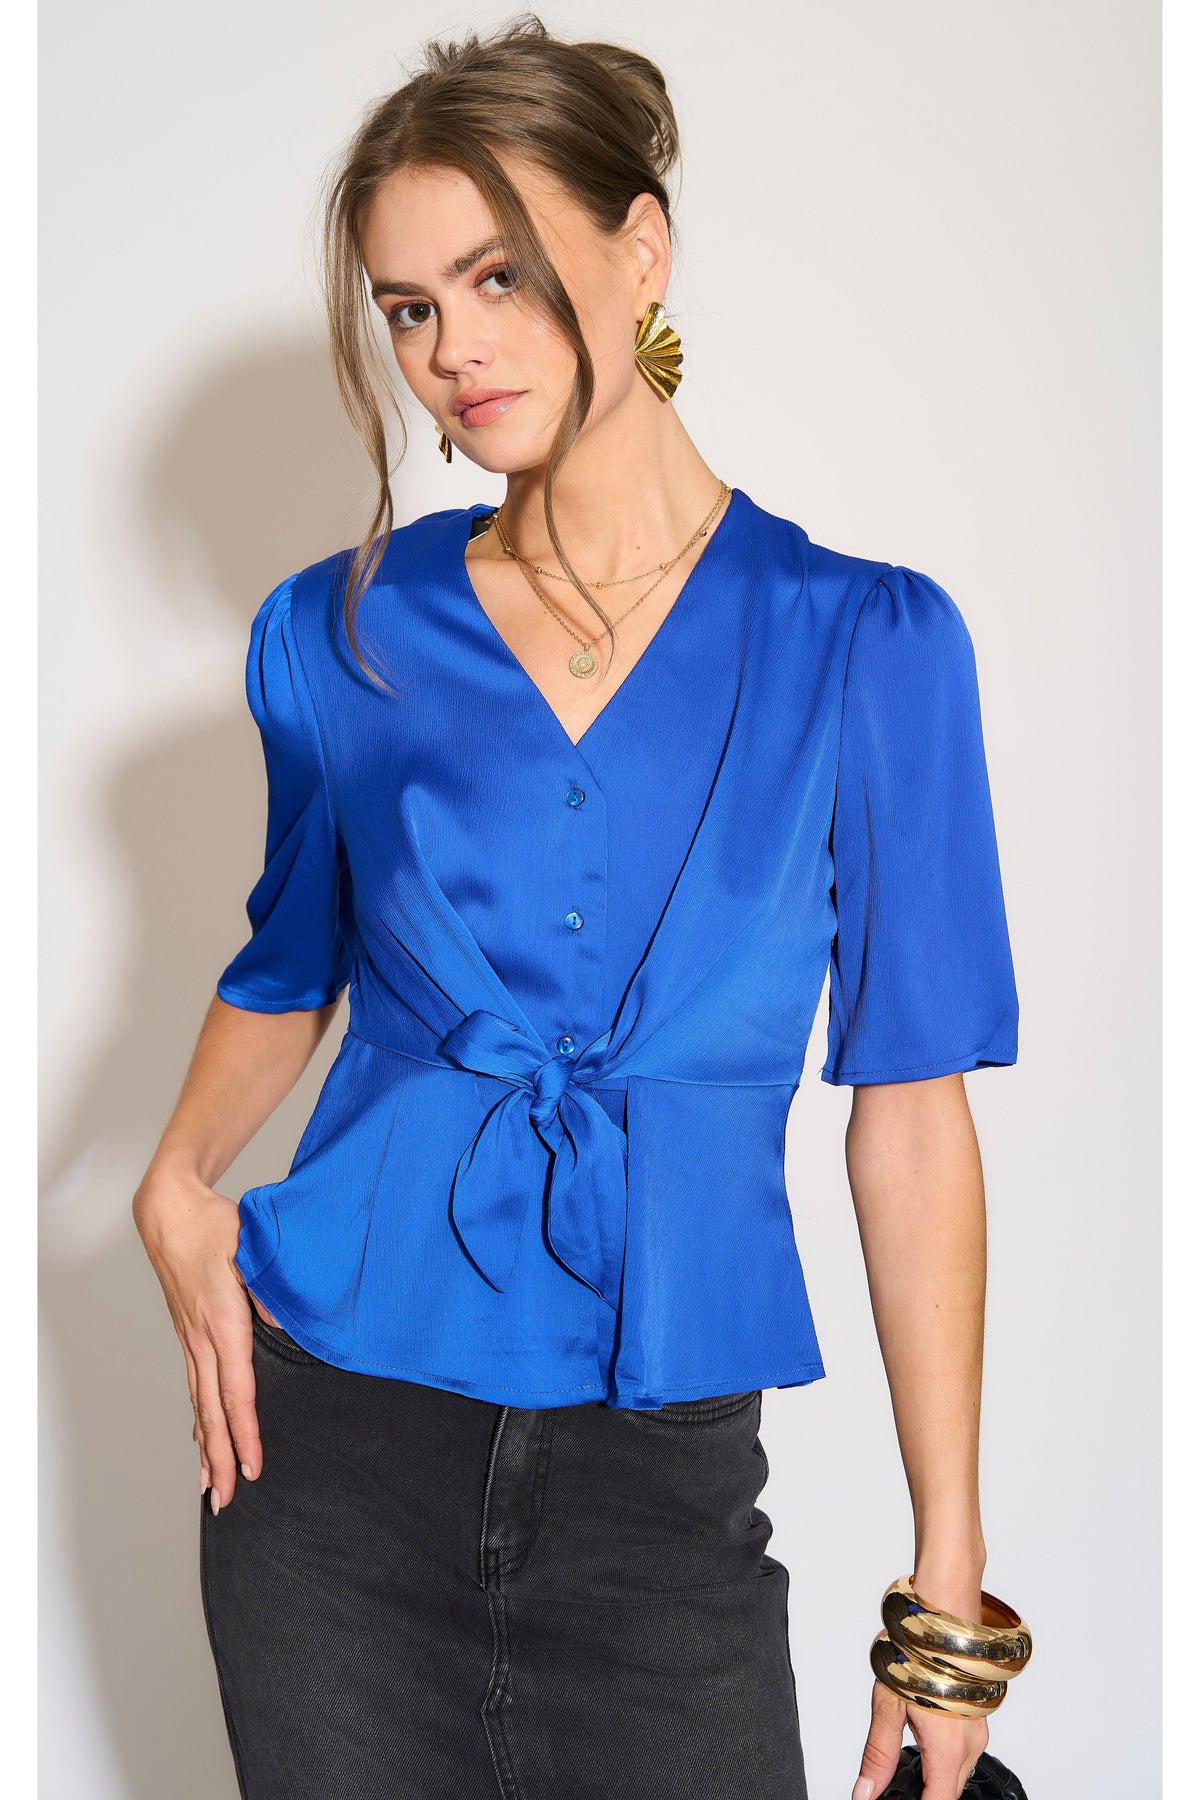 Royal Blue Short Sleeve Knotted Crepe Satin Top LS-2151-8078-31